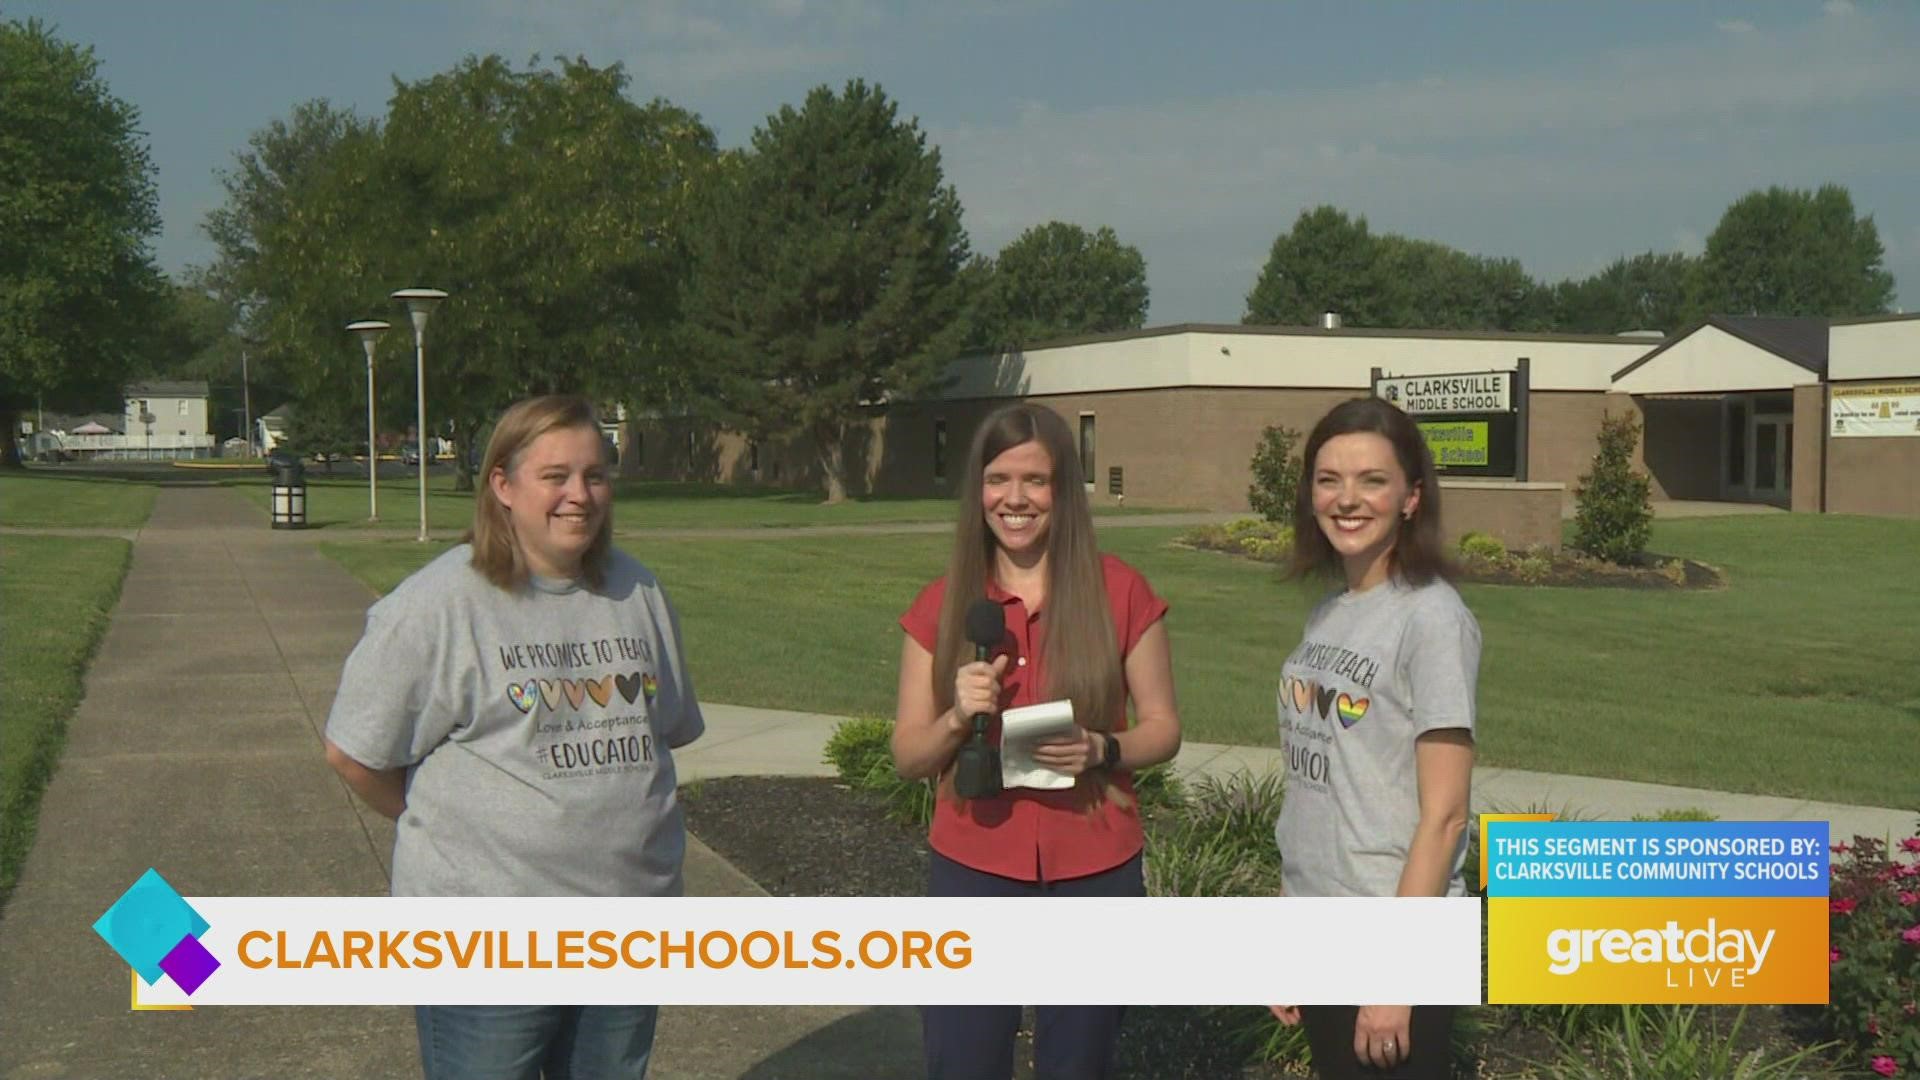 To learn more about Clarksville Community Schools, visit clarksvilleschools.org.